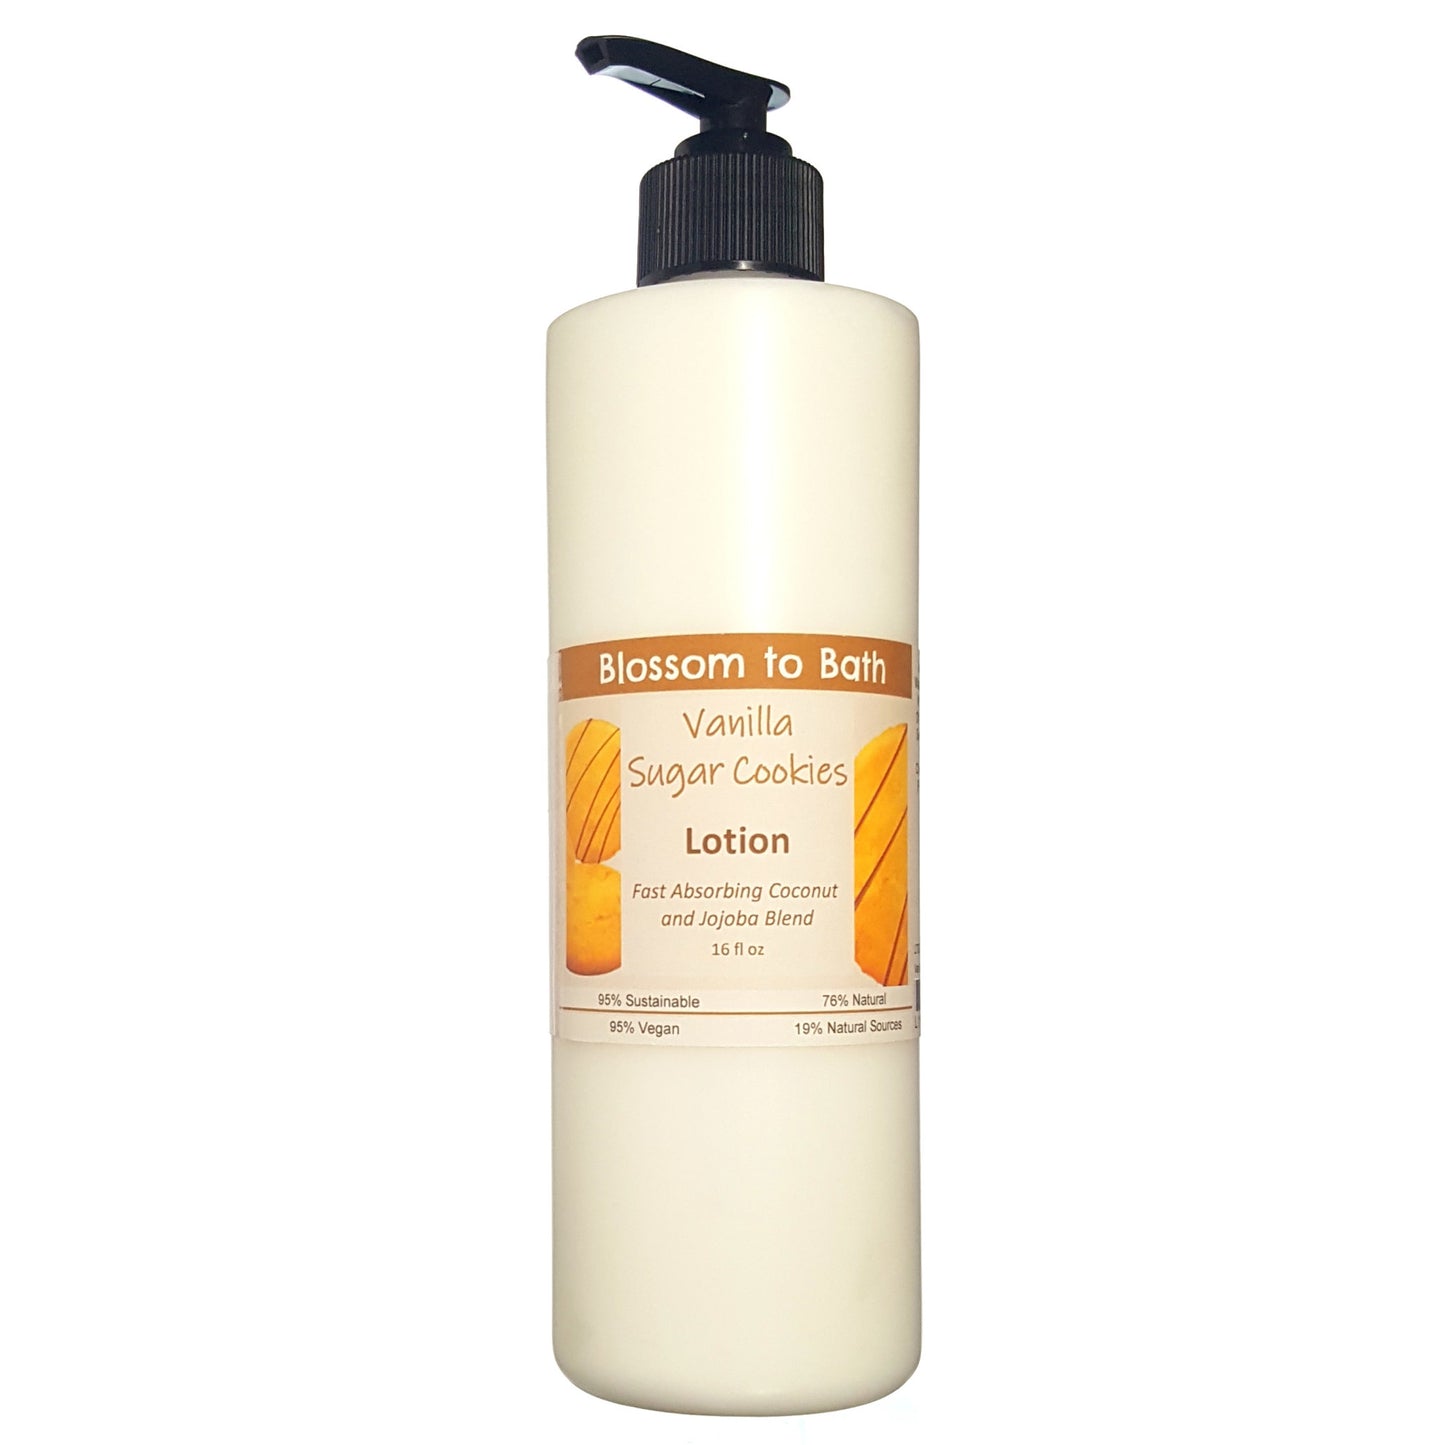 Buy Blossom to Bath Vanilla Sugar Cookies Lotion from Flowersong Soap Studio.  Daily moisture luxury that soaks in quickly made with organic oils and butters that soften and smooth the skin  Smells like sugar cookies in the oven.